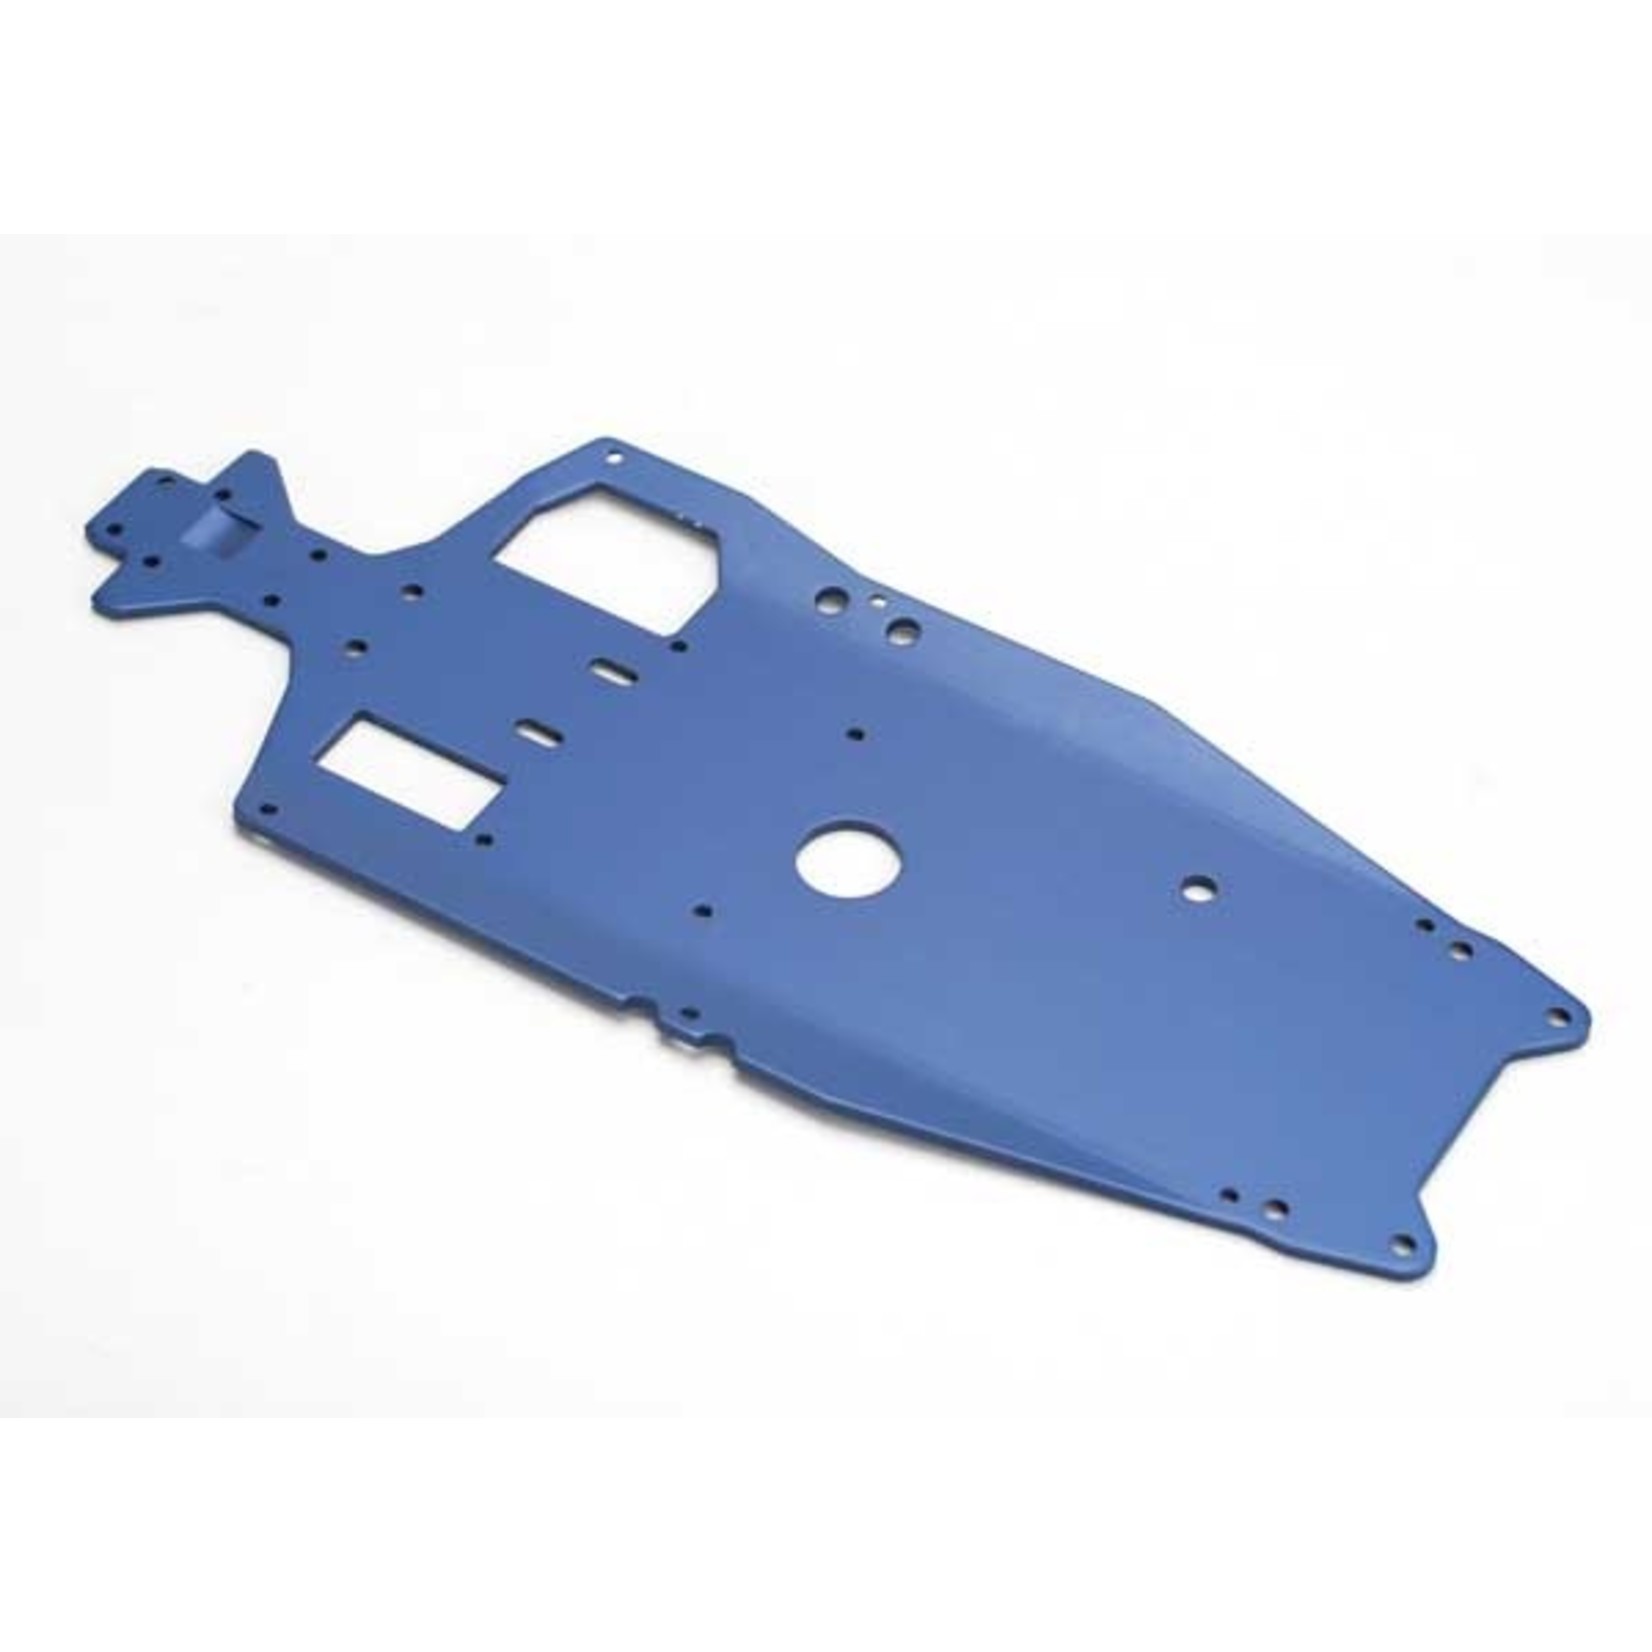 Traxxas 5522 - Chassis, 6061-T6 aluminum (3mm) (blue anodi